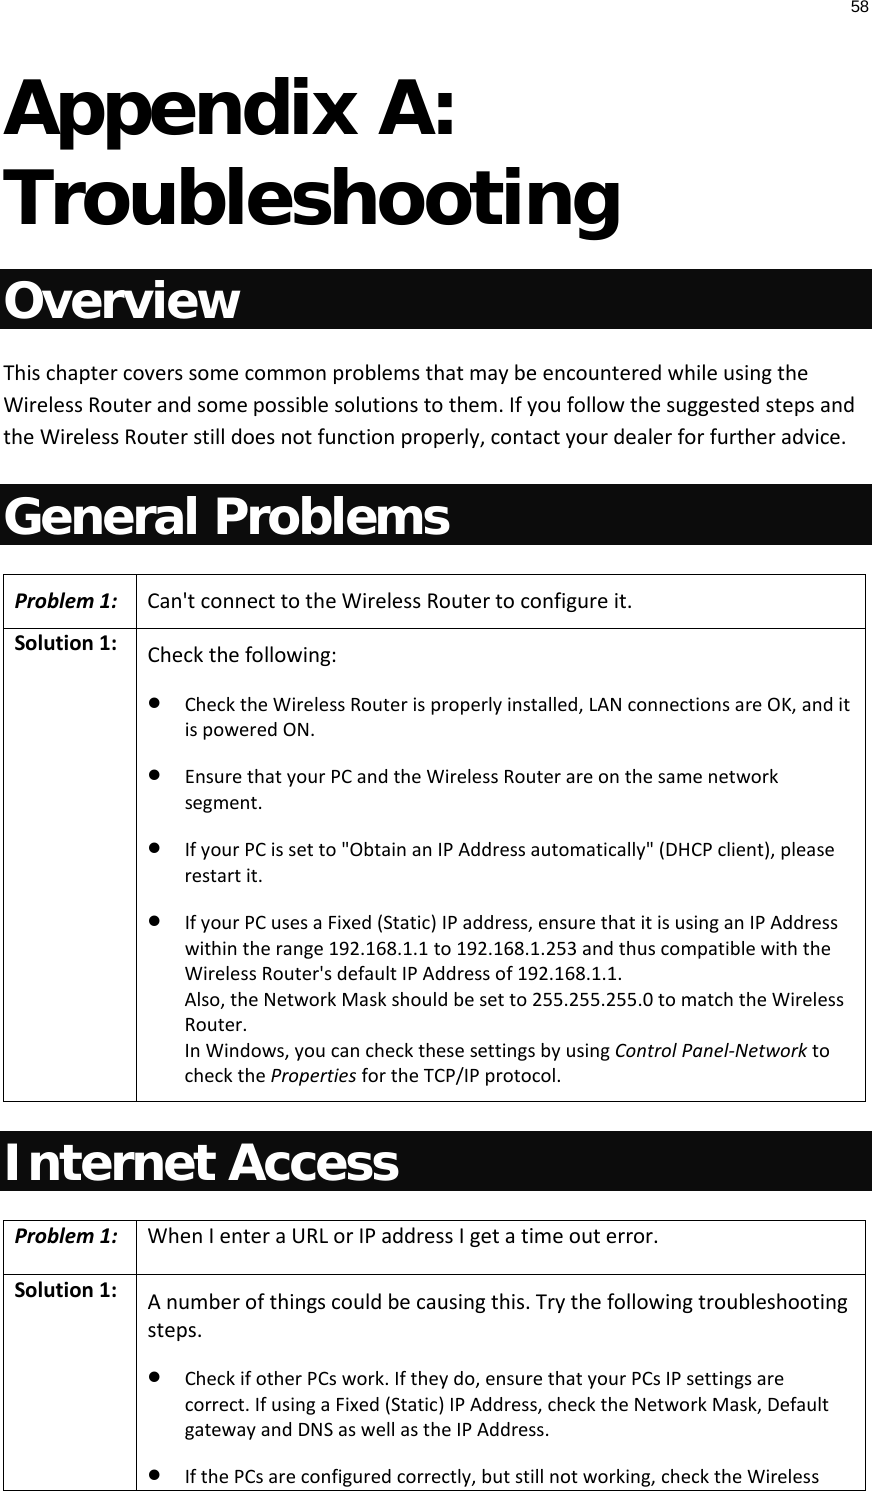 58  Appendix A: Troubleshooting Overview This chapter covers some common problems that may be encountered while using the Wireless Router and some possible solutions to them. If you follow the suggested steps and the Wireless Router still does not function properly, contact your dealer for further advice. General Problems Problem 1: Can&apos;t connect to the Wireless Router to configure it. Solution 1: Check the following: • Check the Wireless Router is properly installed, LAN connections are OK, and it is powered ON. • Ensure that your PC and the Wireless Router are on the same network segment.  • If your PC is set to &quot;Obtain an IP Address automatically&quot; (DHCP client), please restart it. • If your PC uses a Fixed (Static) IP address, ensure that it is using an IP Address within the range 192.168.1.1 to 192.168.1.253 and thus compatible with the Wireless Router&apos;s default IP Address of 192.168.1.1.  Also, the Network Mask should be set to 255.255.255.0 to match the Wireless Router. In Windows, you can check these settings by using Control Panel-Network to check the Properties for the TCP/IP protocol.  Internet Access Problem 1: When I enter a URL or IP address I get a time out error. Solution 1: A number of things could be causing this. Try the following troubleshooting steps. • Check if other PCs work. If they do, ensure that your PCs IP settings are correct. If using a Fixed (Static) IP Address, check the Network Mask, Default gateway and DNS as well as the IP Address. • If the PCs are configured correctly, but still not working, check the Wireless 